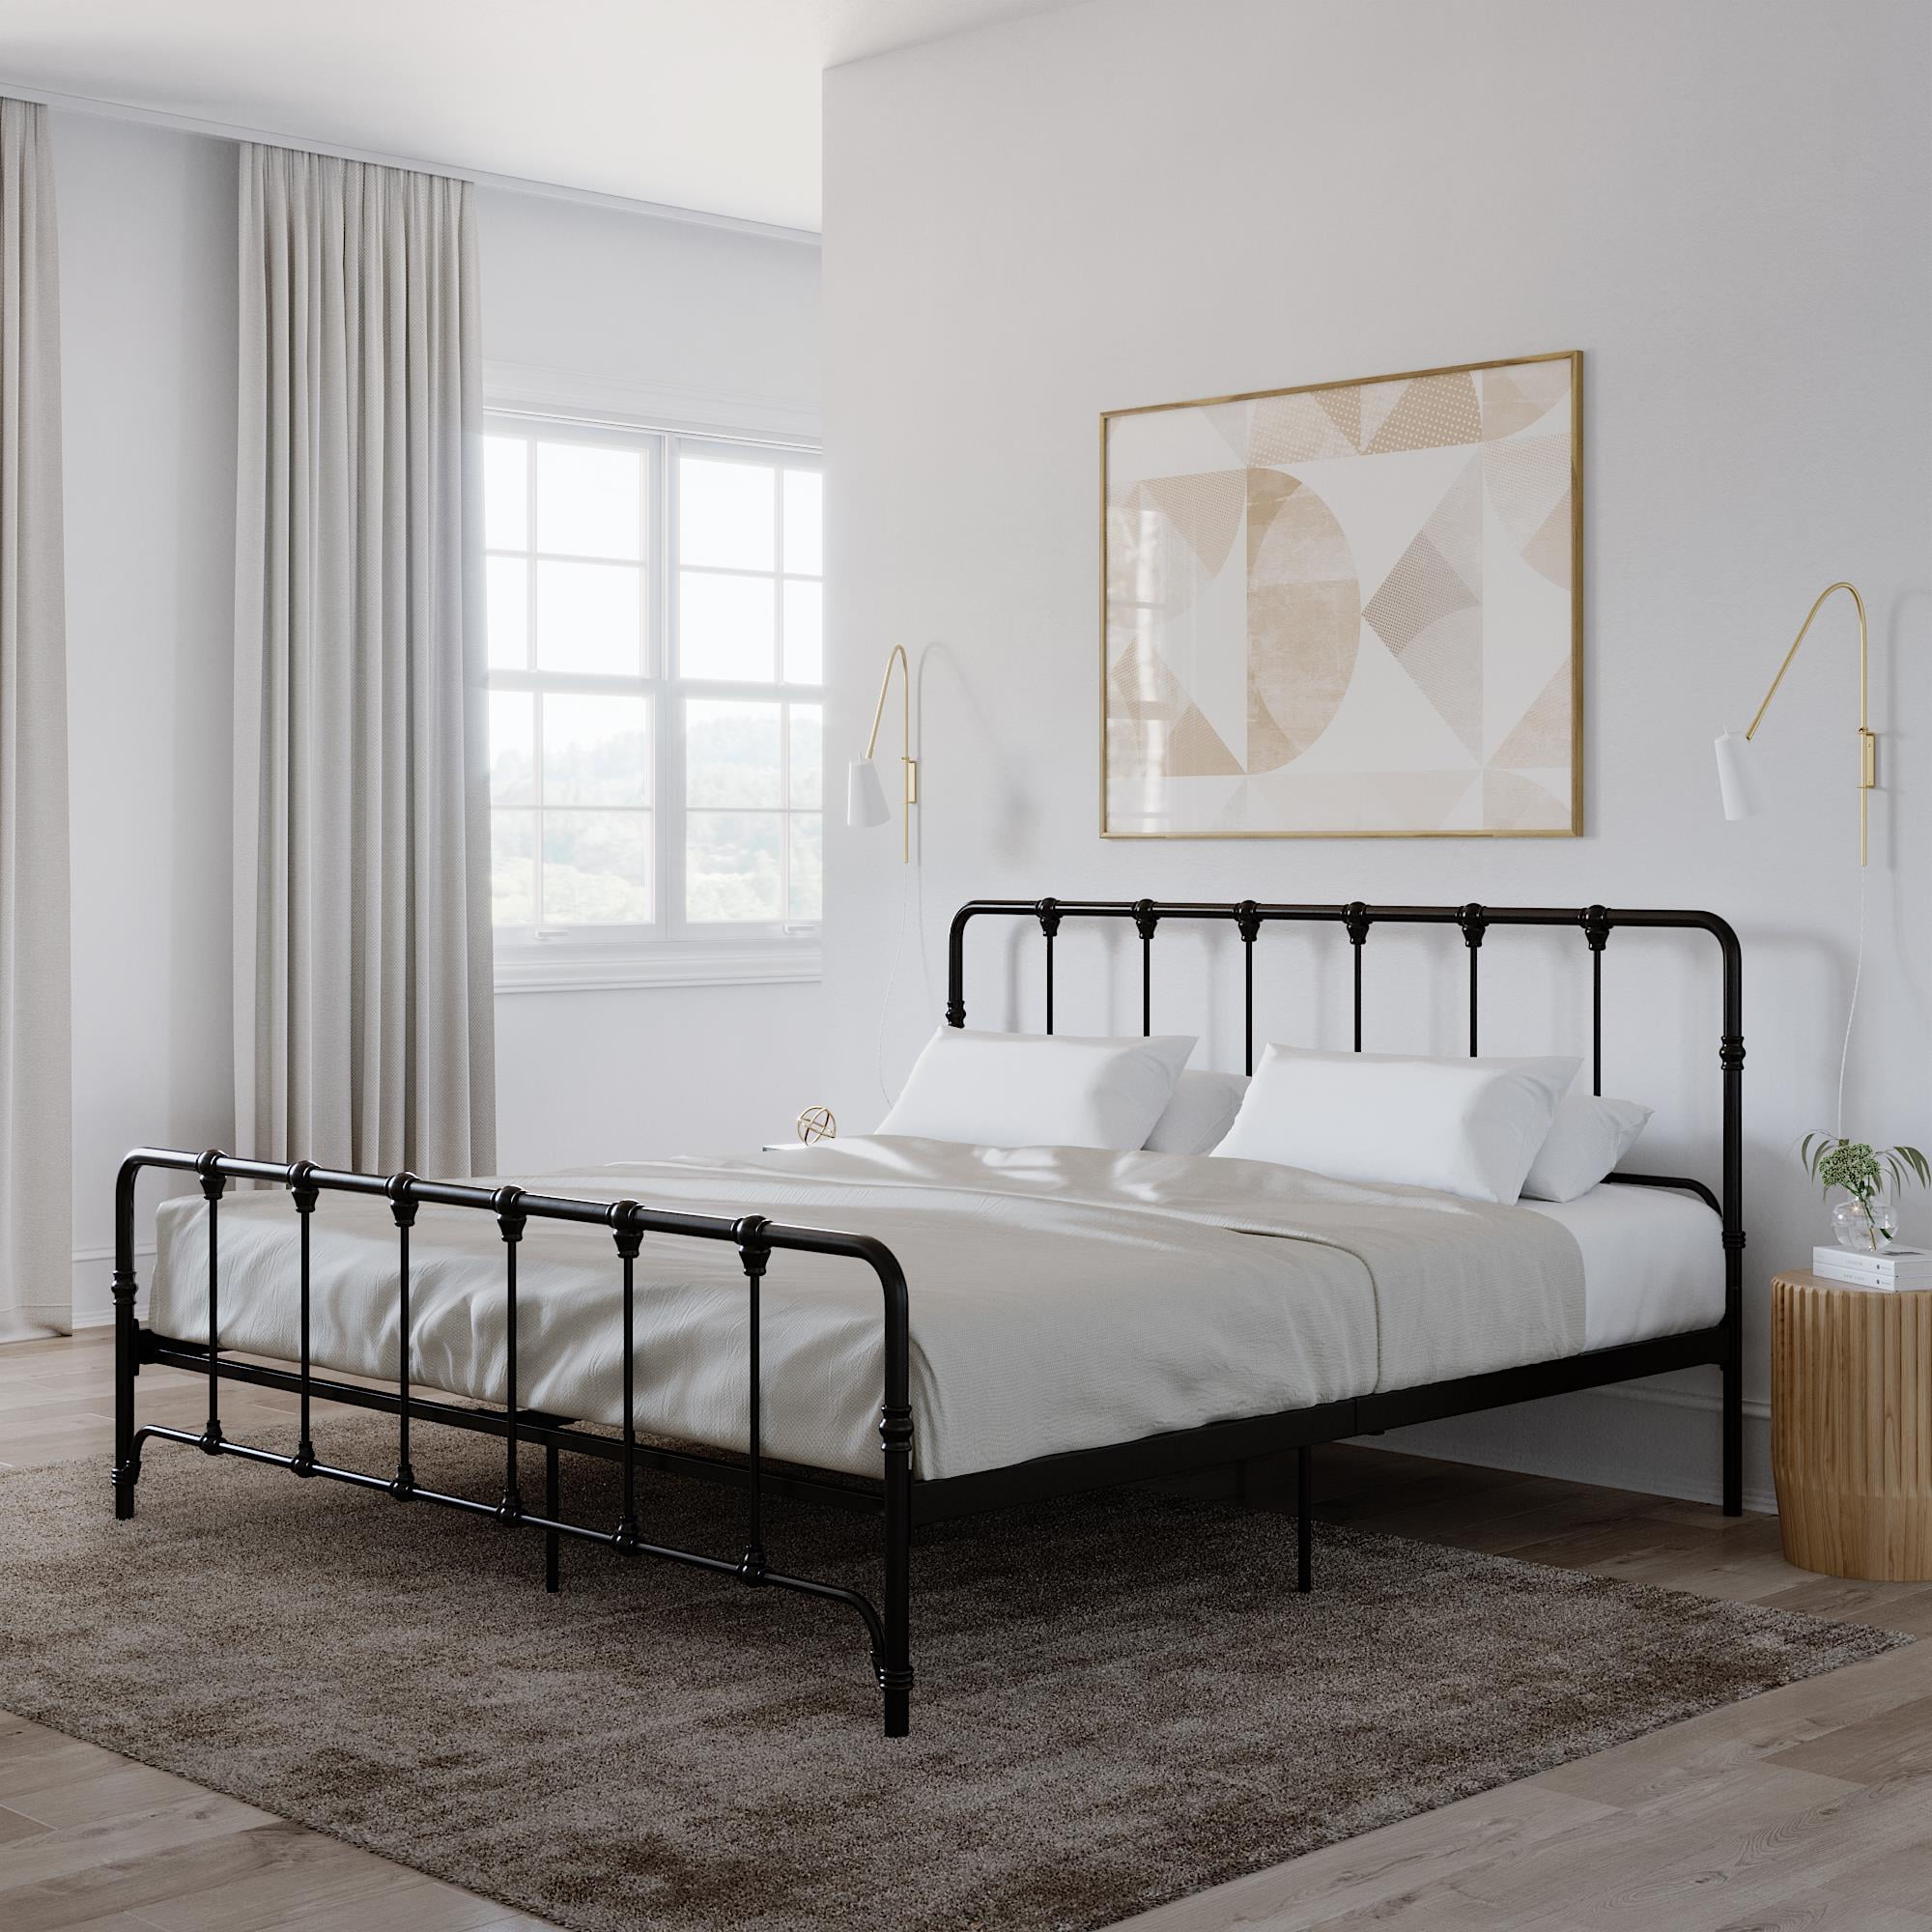 Mainstays Farmhouse Metal Bed King, Steel King Size Bed Frame